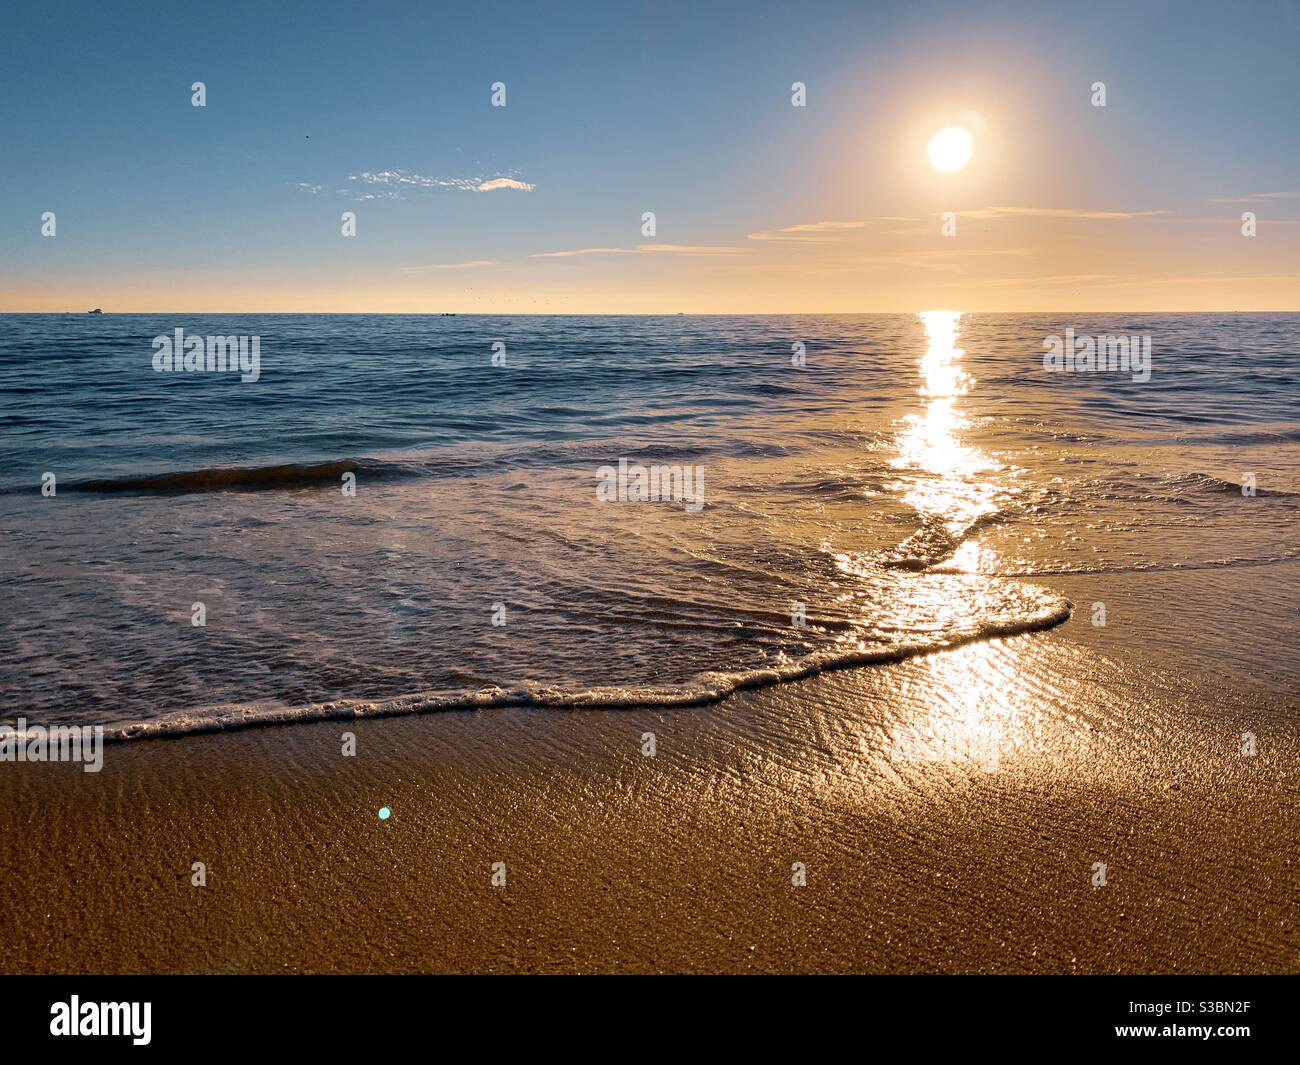 Low angle shot of a gentle wave washing onto sandy beach with late afternoon sun low on the horizon illuminating the ocean. Stock Photo